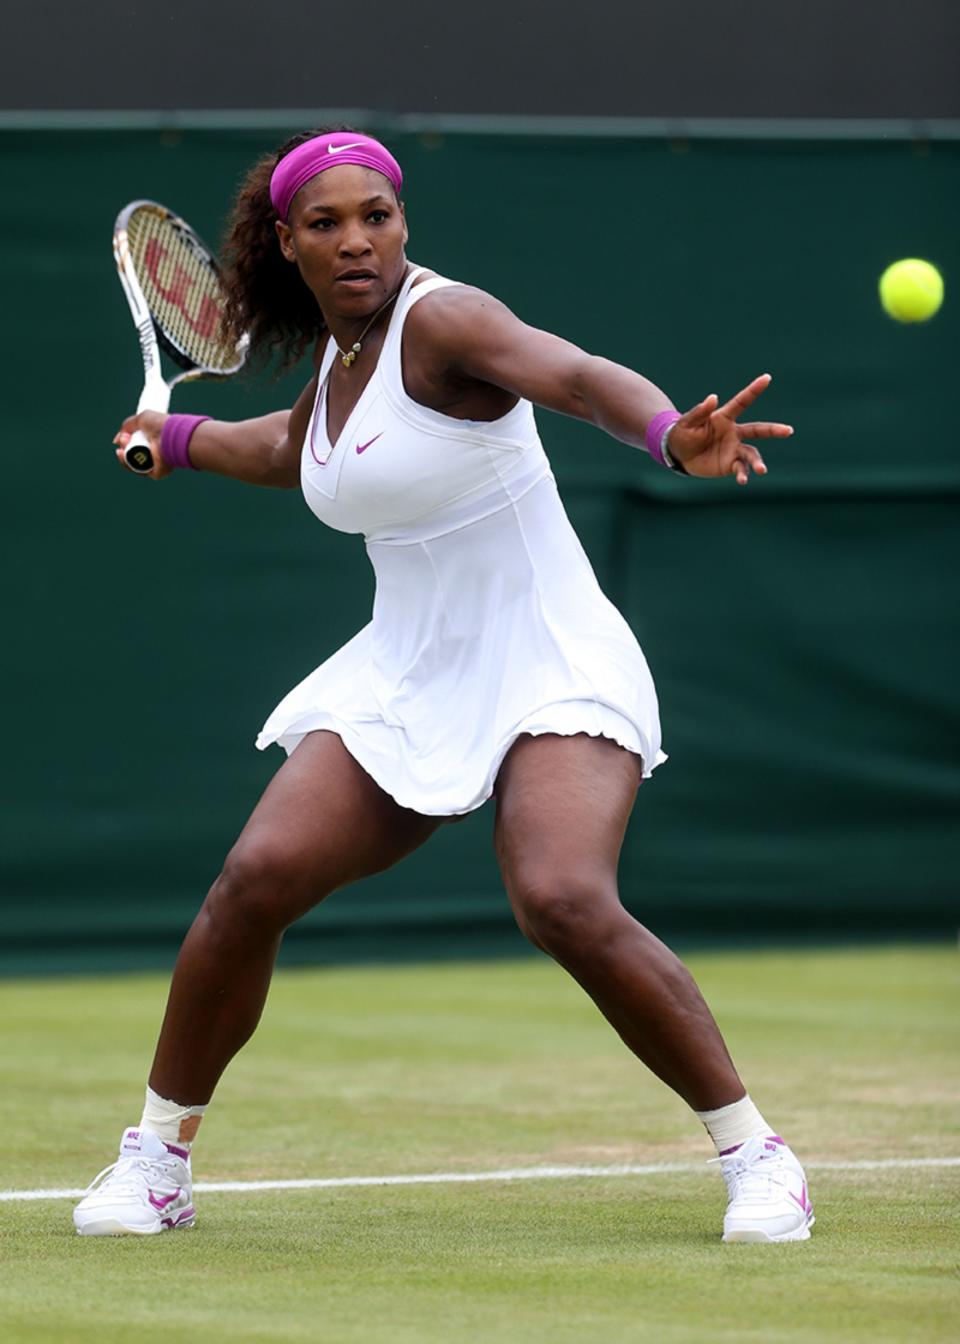 serena williams wimbledon fashion outfits and looks, LONDON, ENGLAND - JUNE 26: Serena Williams of the USA lines up a shot during her Ladies' Singles first round match against Barbora Zahlavova Strycova of Czech Republic on day two of the Wimbledon Lawn Tennis Championships at the All England Lawn Tennis and Croquet Club on June 26, 2012 in London, England. (Photo by Julian Finney/Getty Images)